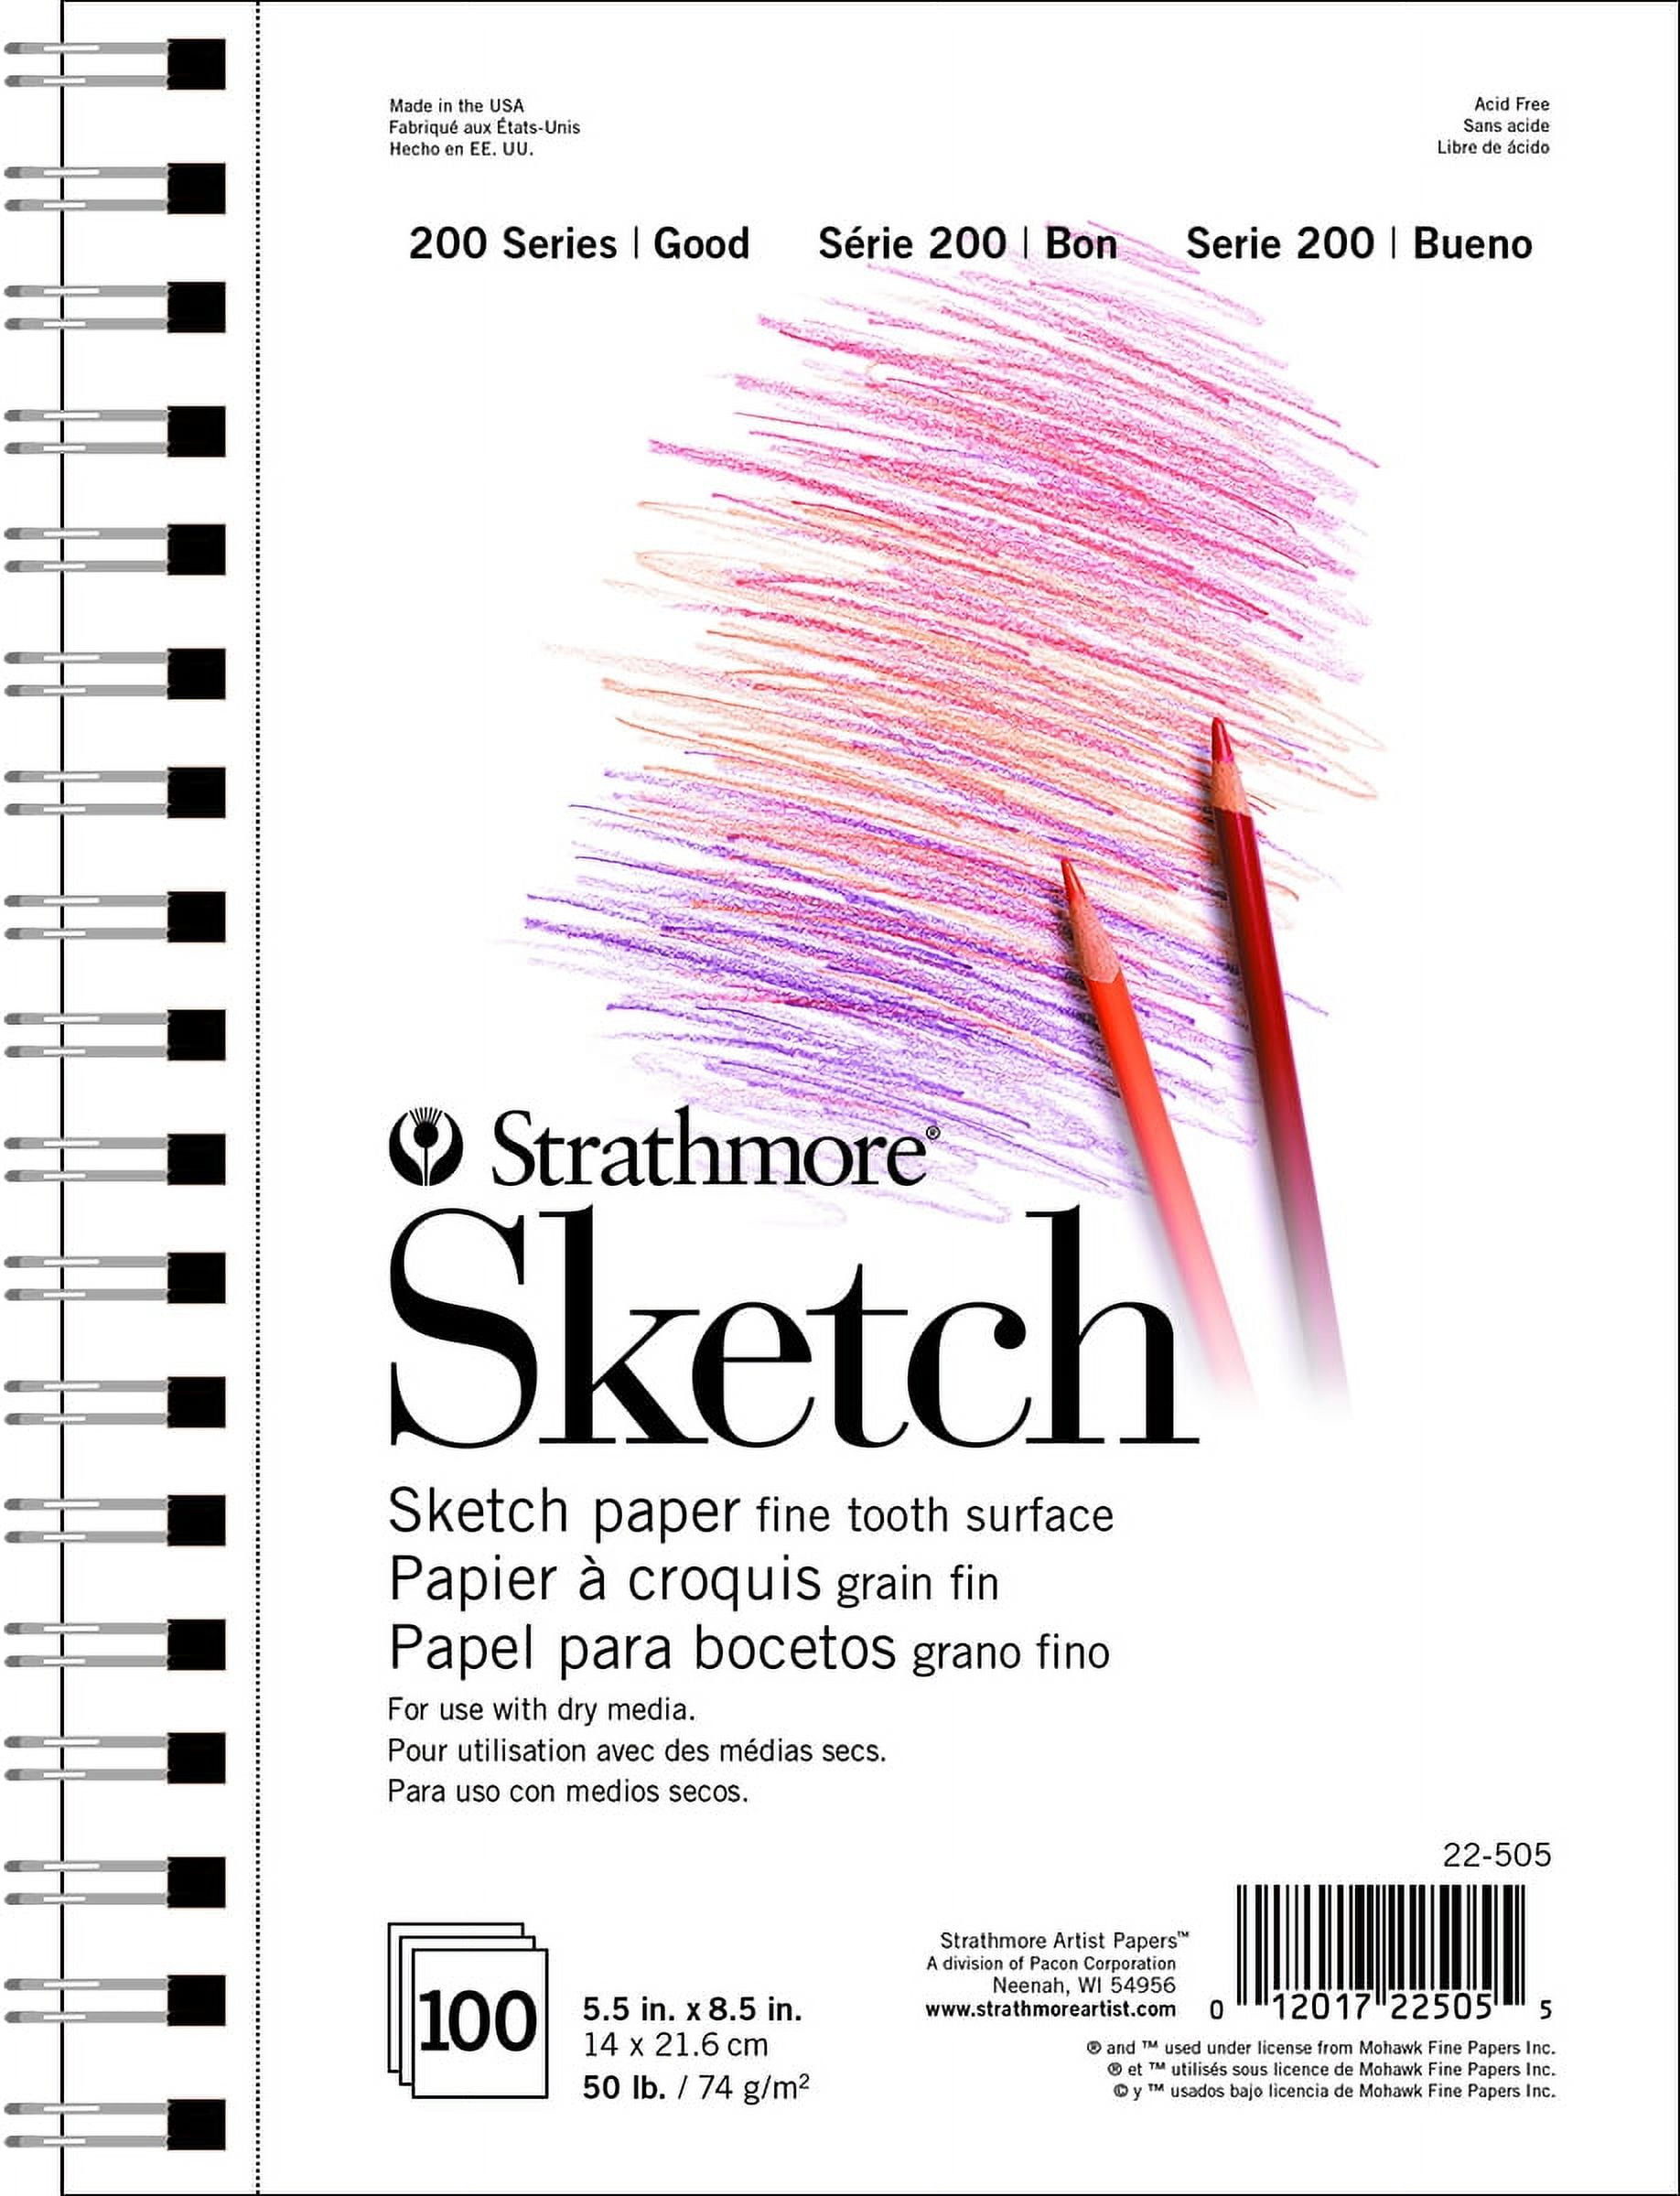 Strathmore 400 Series Sketch Paper Pad, Toned Tan, Side Wire Bound, 9x12  inches, 50 Sheets (80lb/118g)